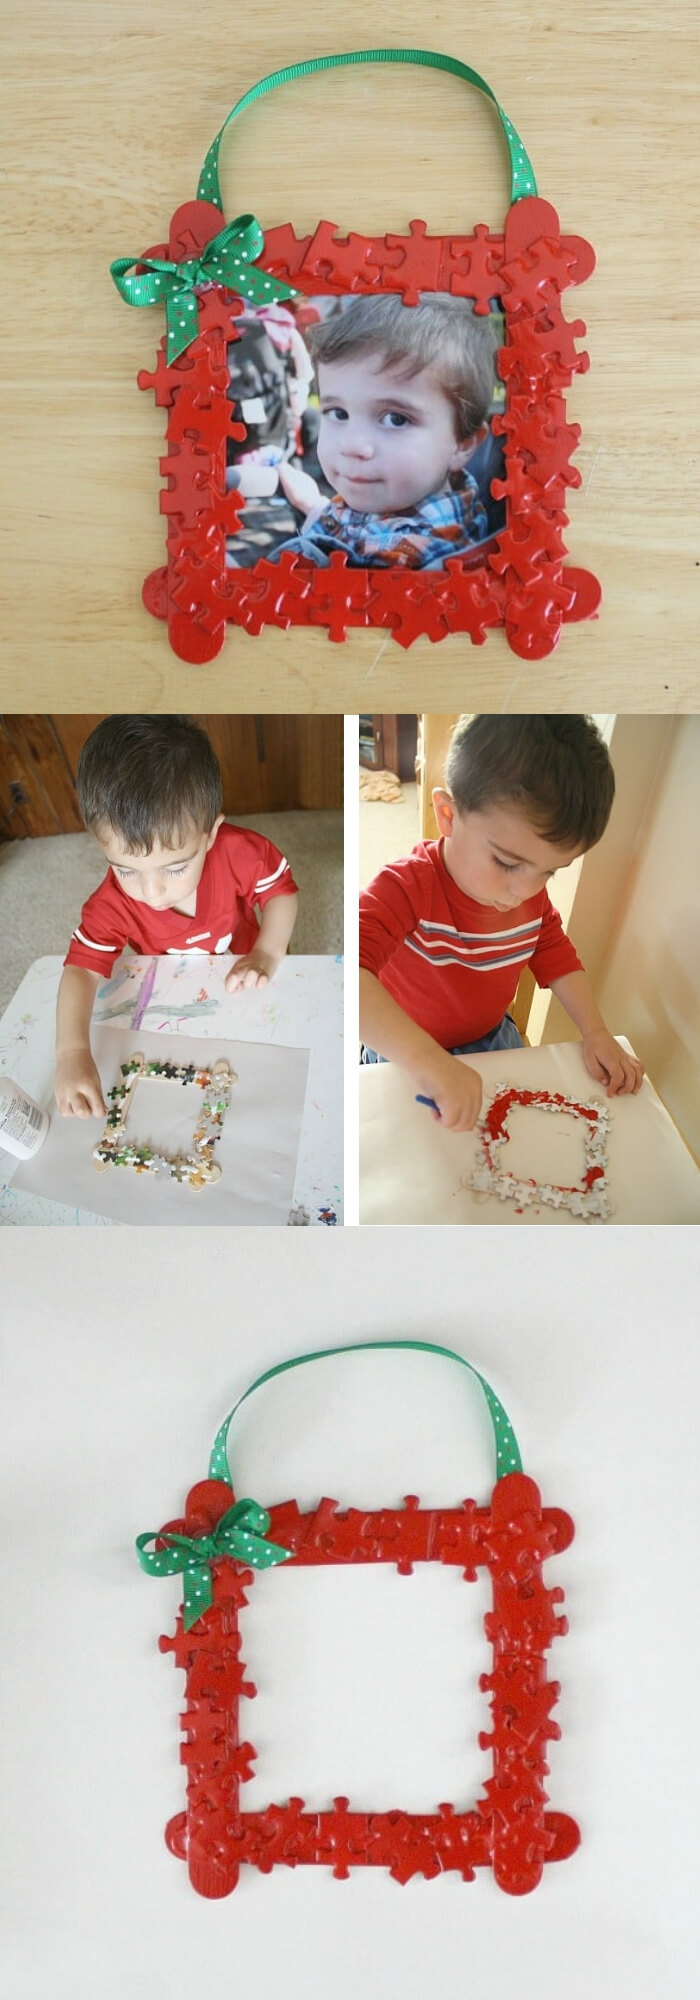 Puzzle Piece Frame | Photo Frames | Easy, Inexpensive, and Creative Christmas Crafts for Kids